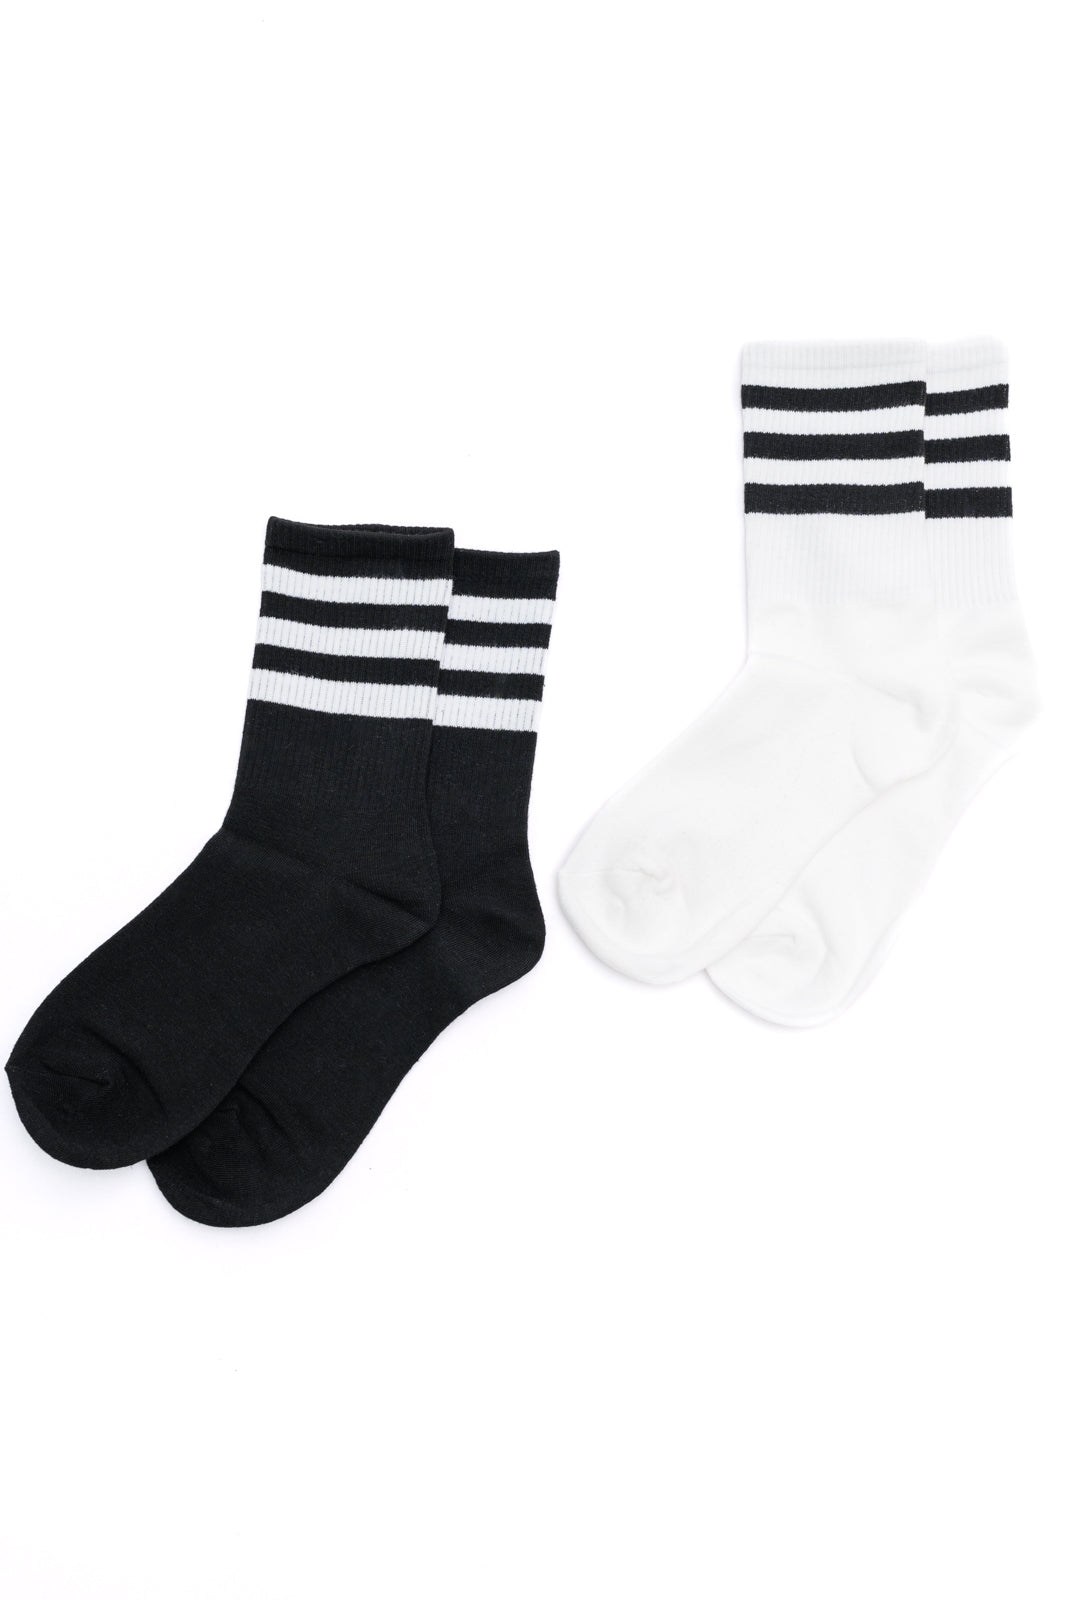 Who Let the Dogs Out Tube Socks in Black and White **FINAL SALE**